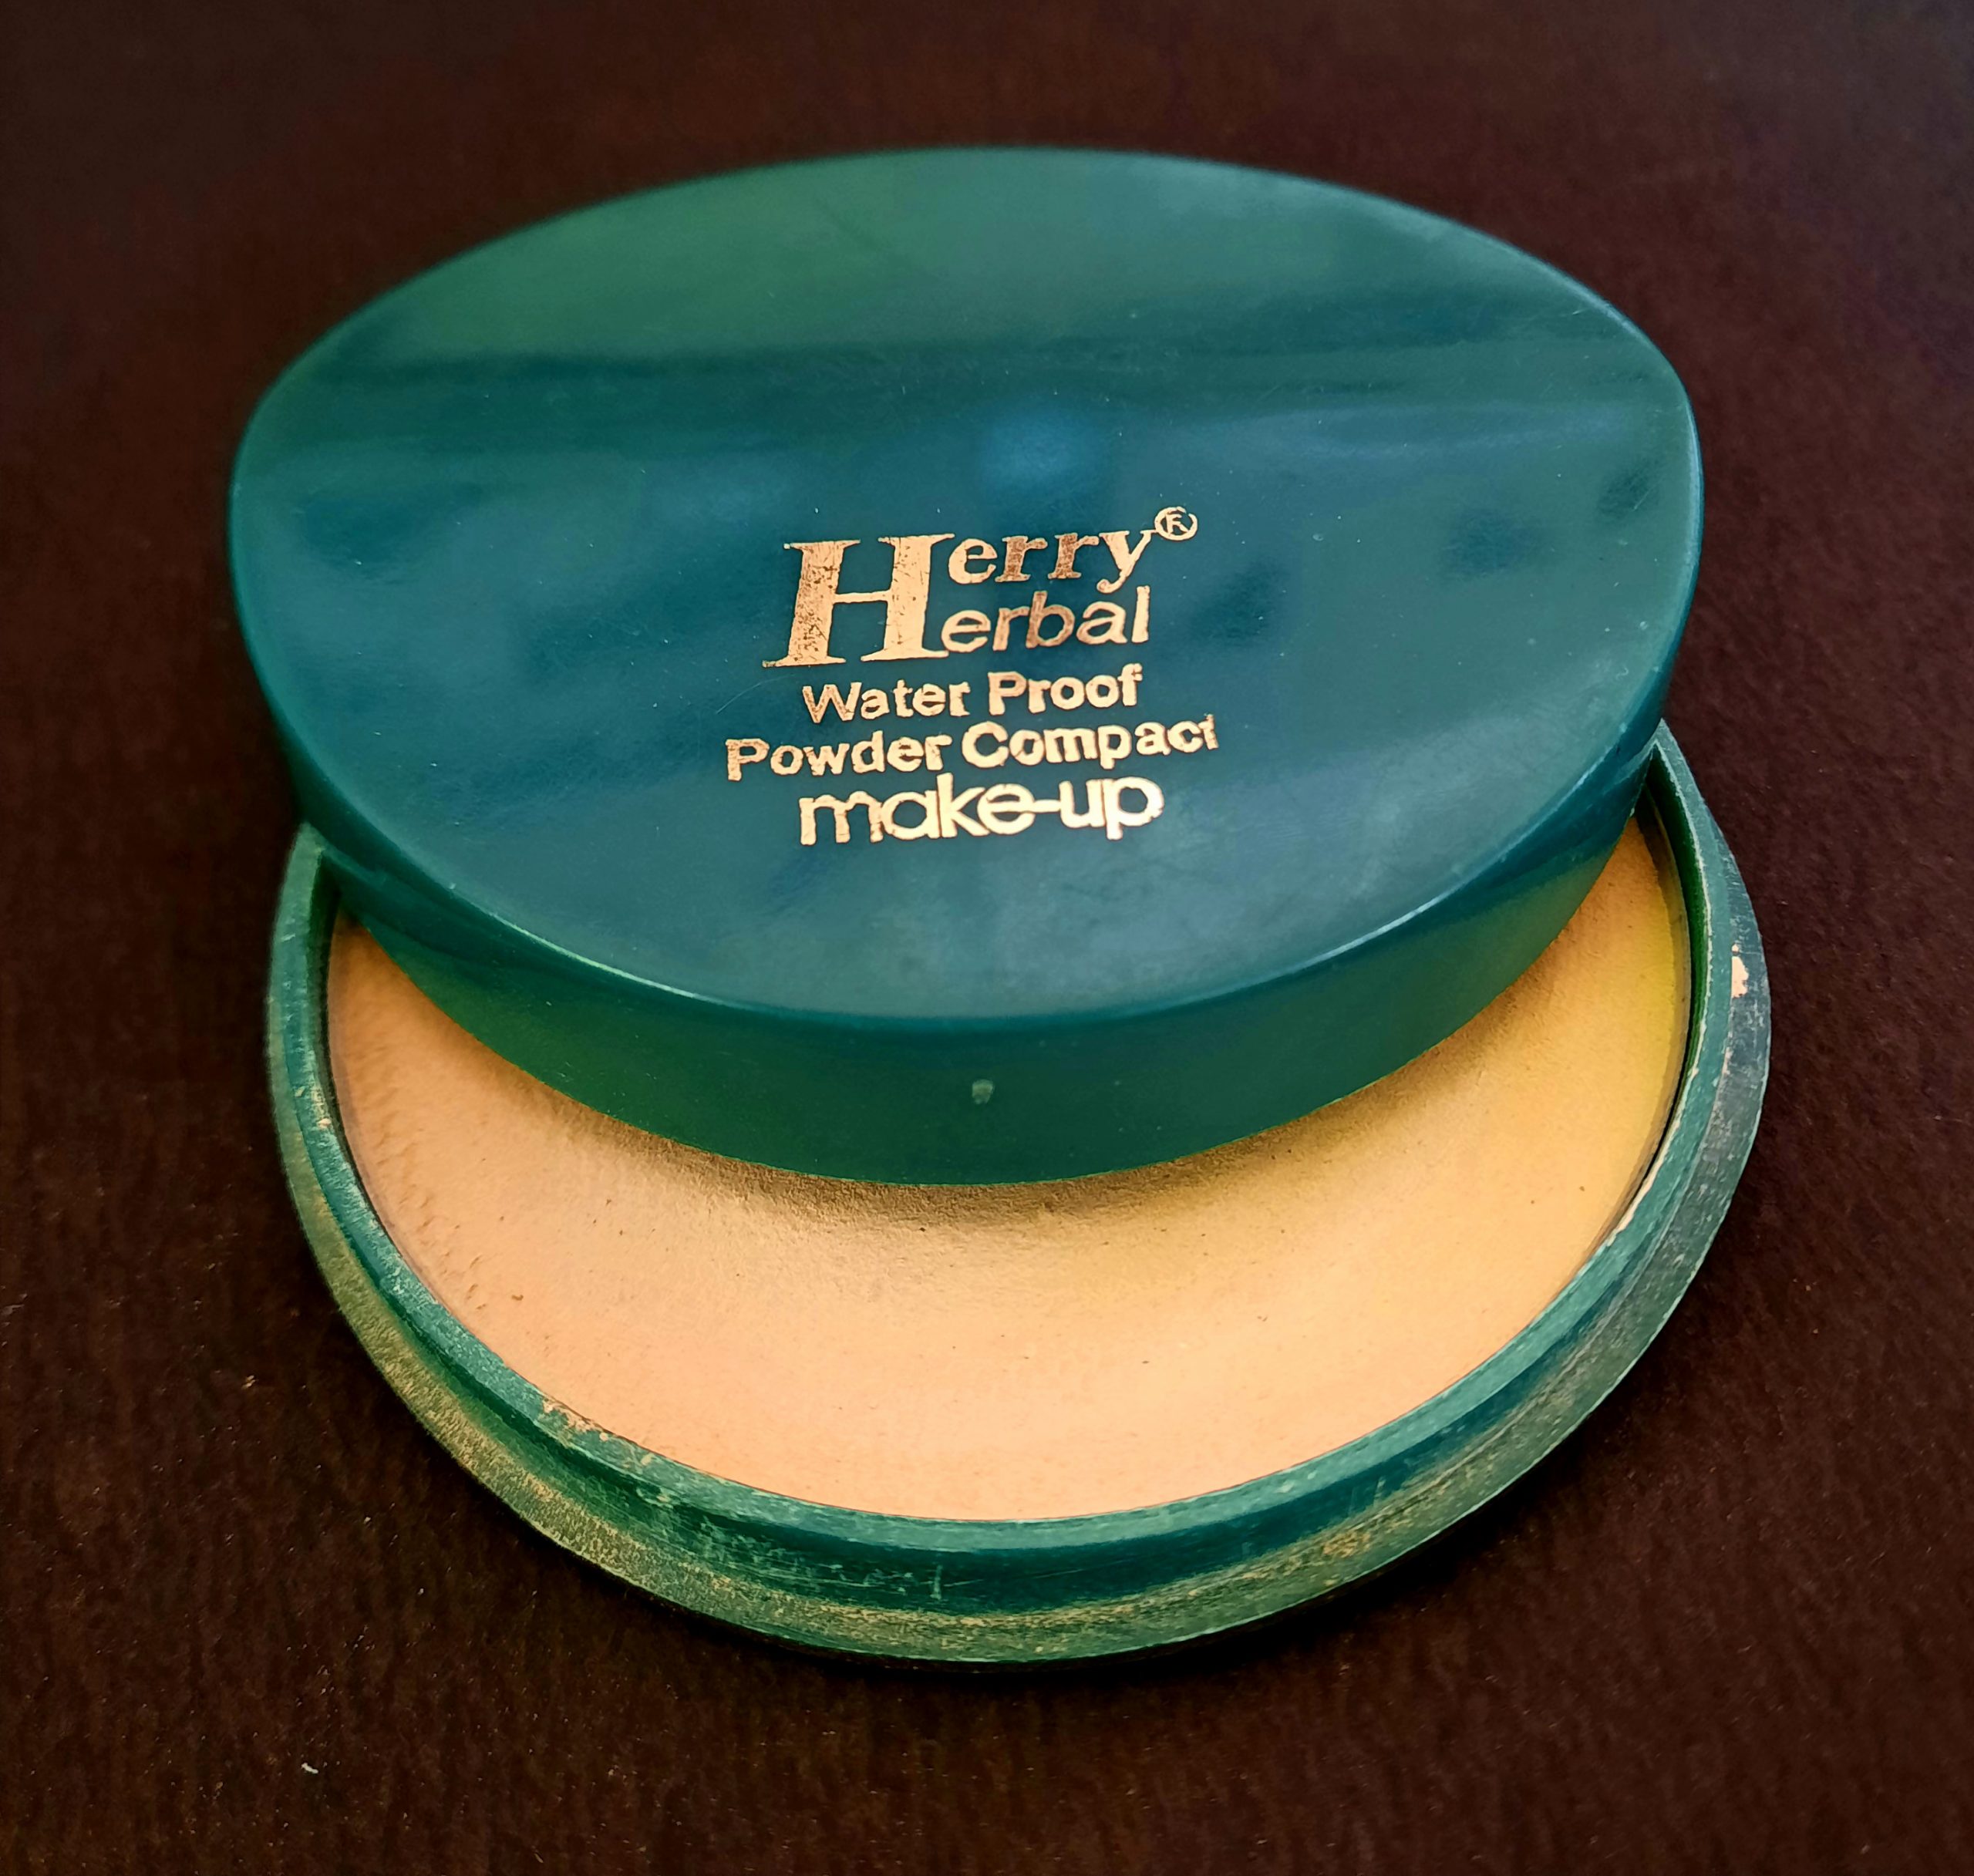 A cosmetic product